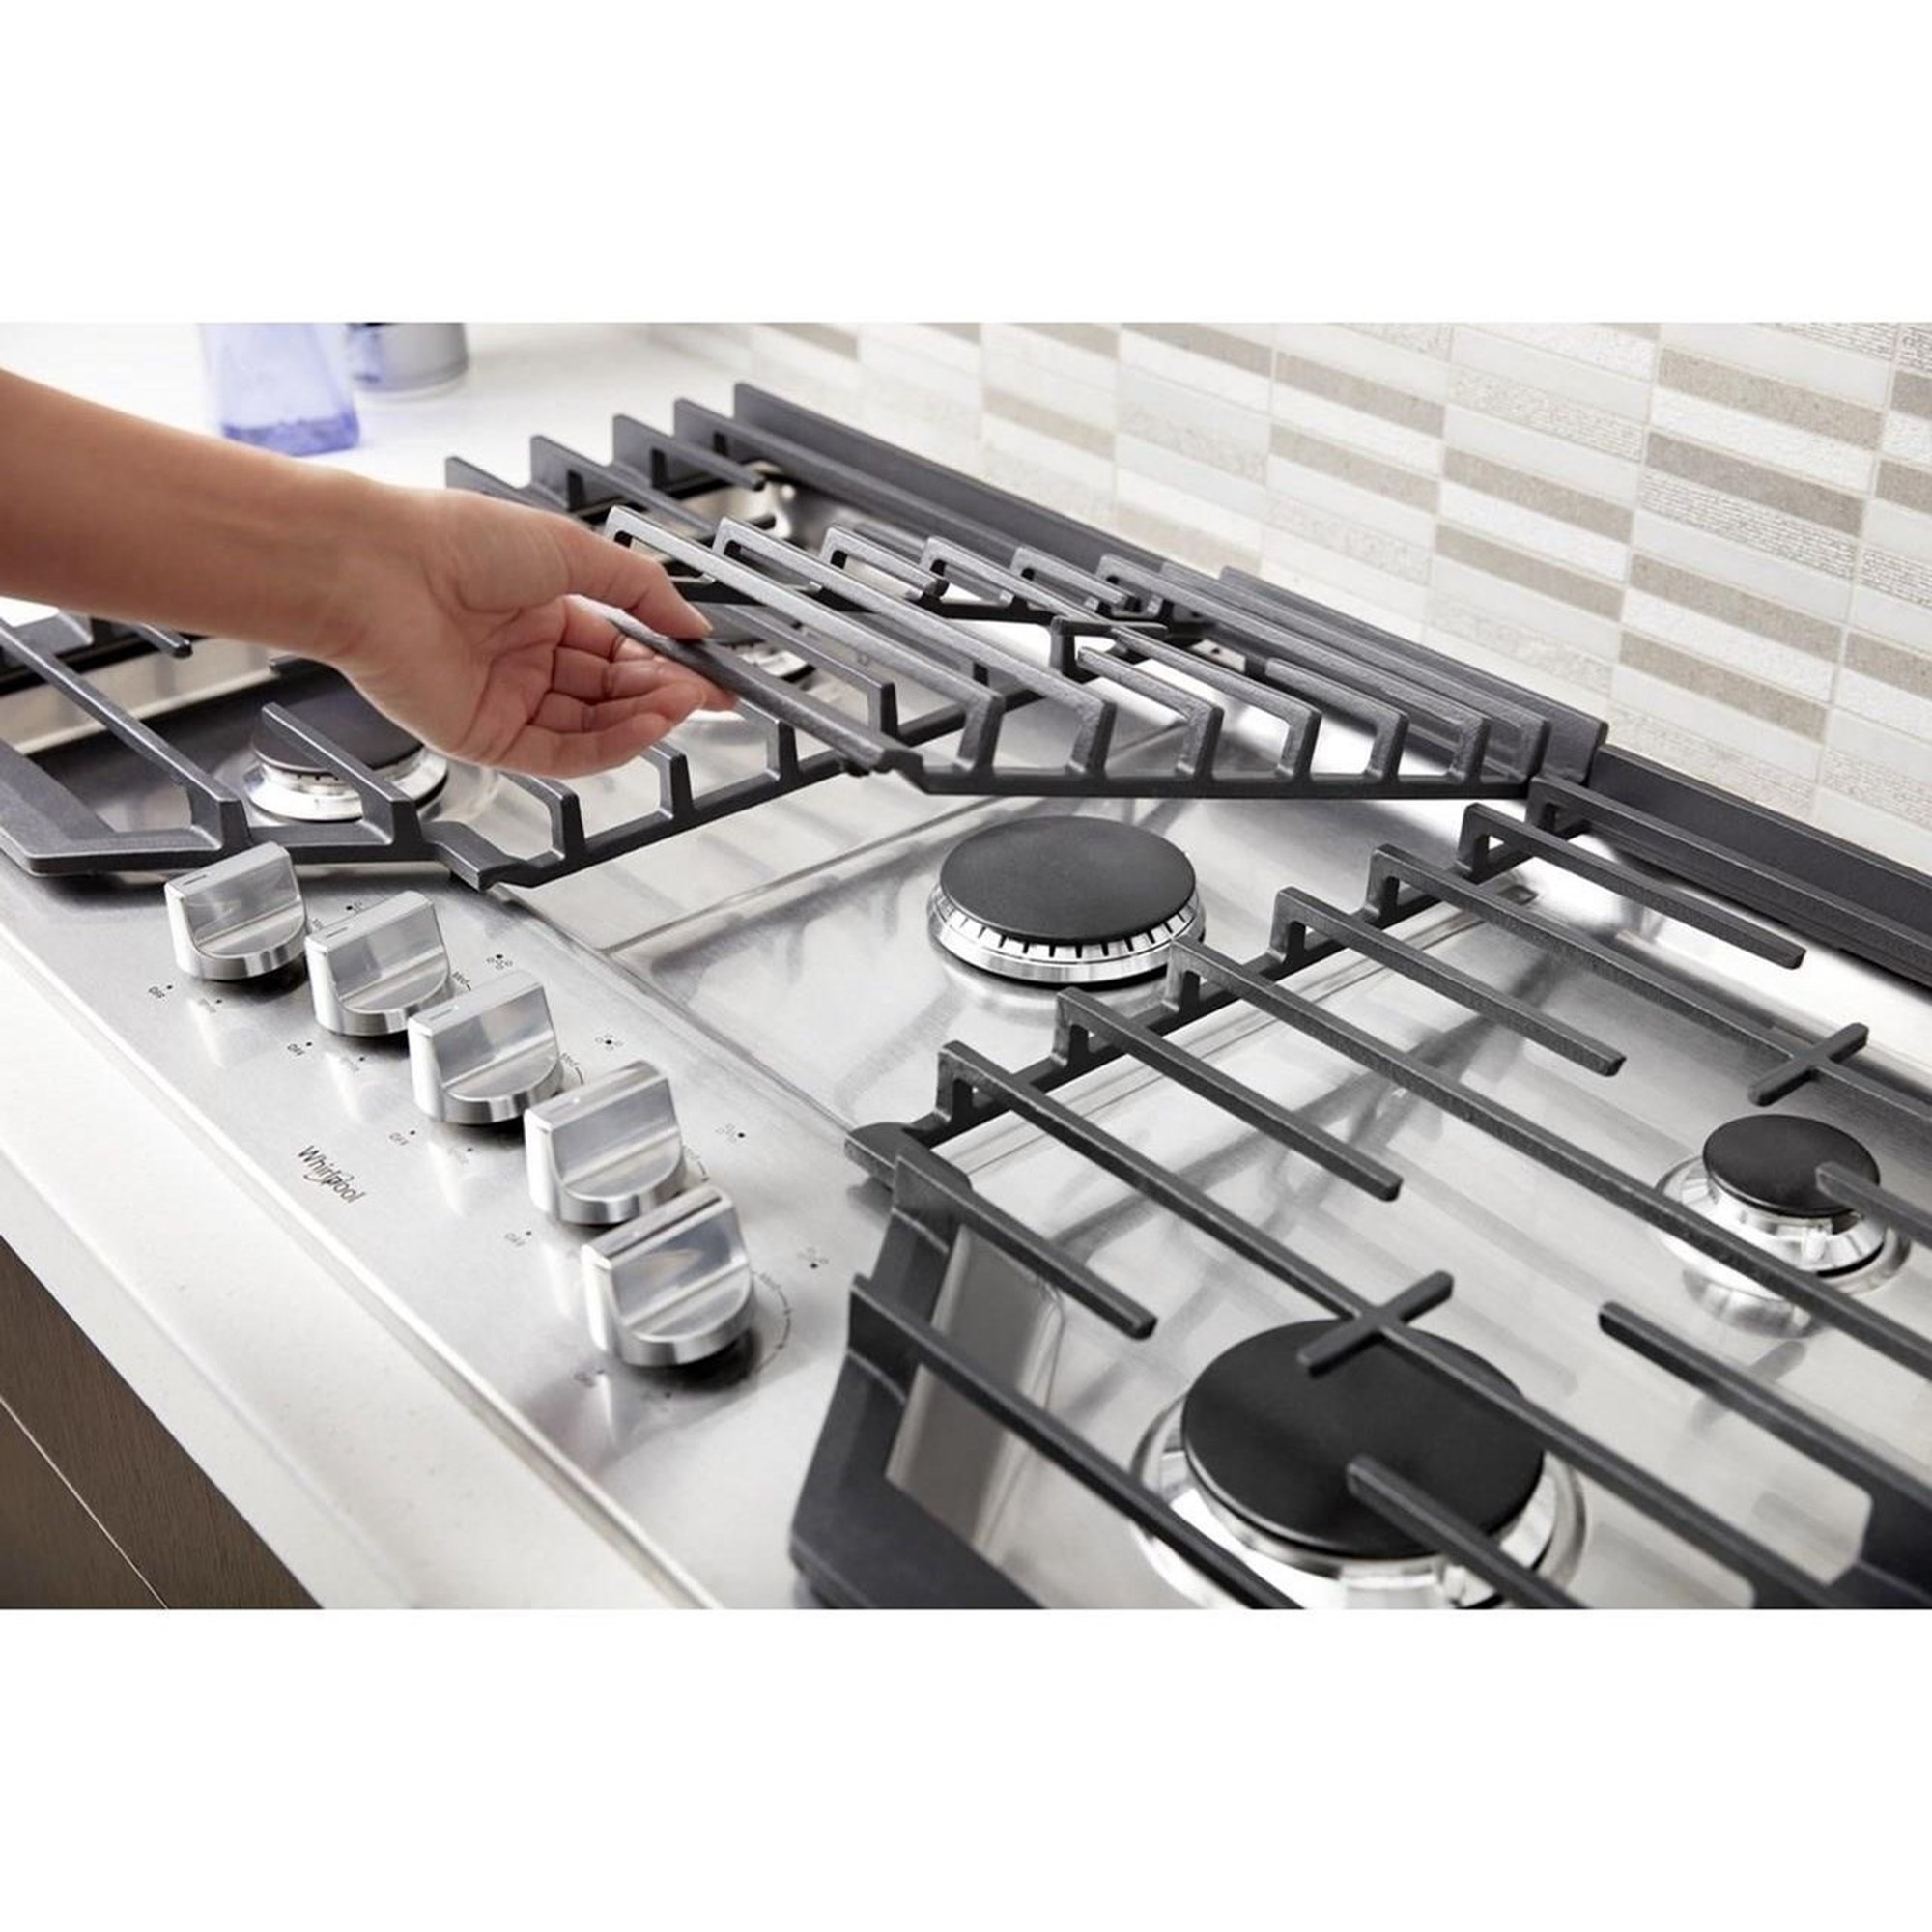 Whirlpool WCG97US6HS 36-inch Gas Cooktop with Griddle